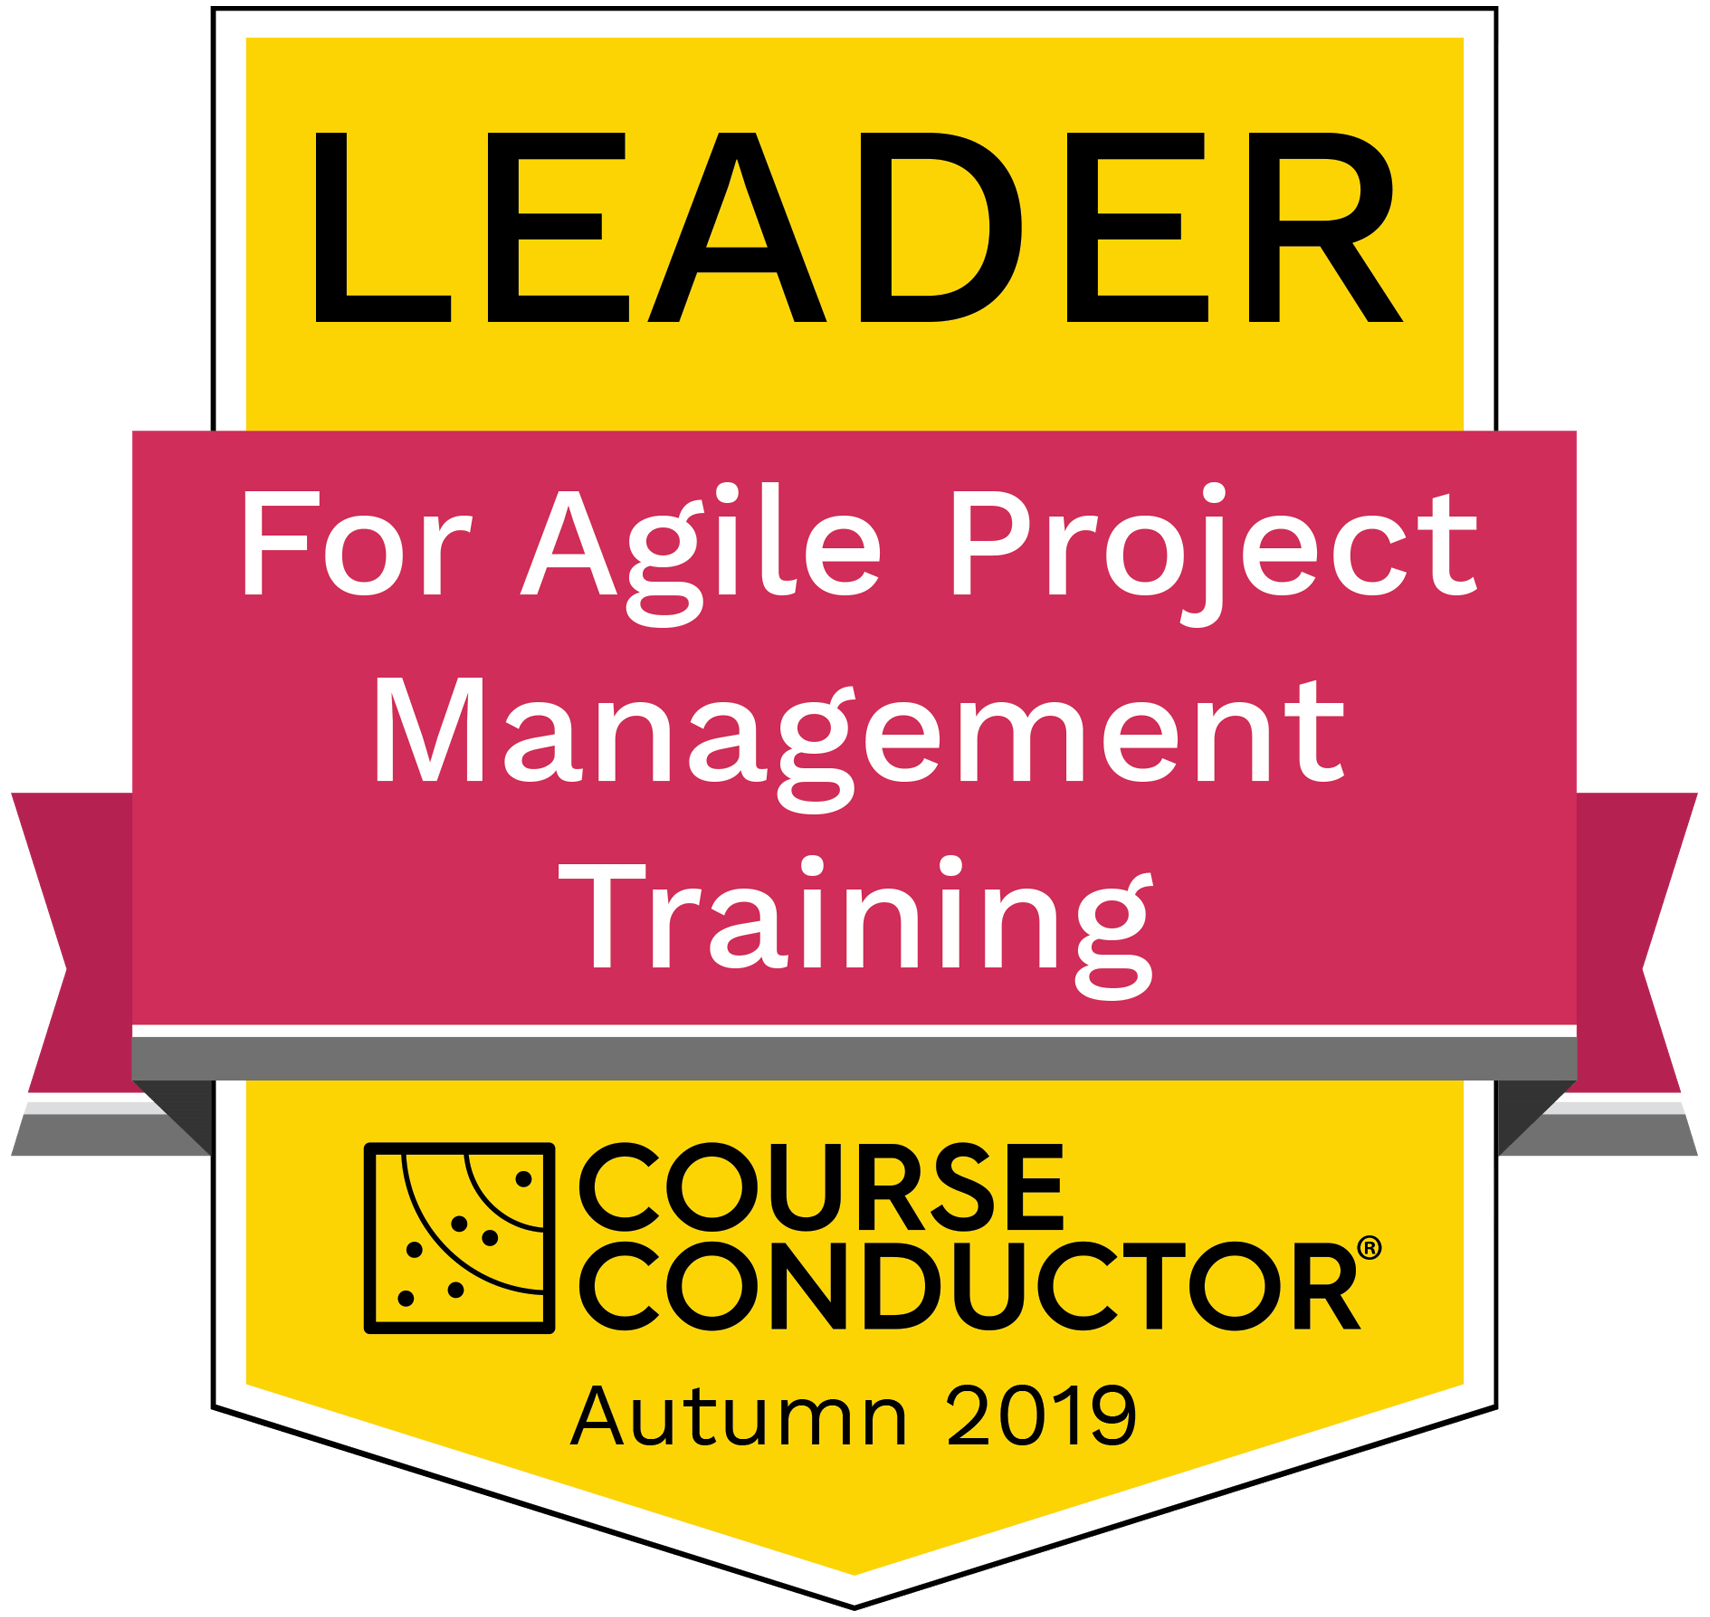 Course Conductor Award Leader Agile Project Management Training Autumn 2019